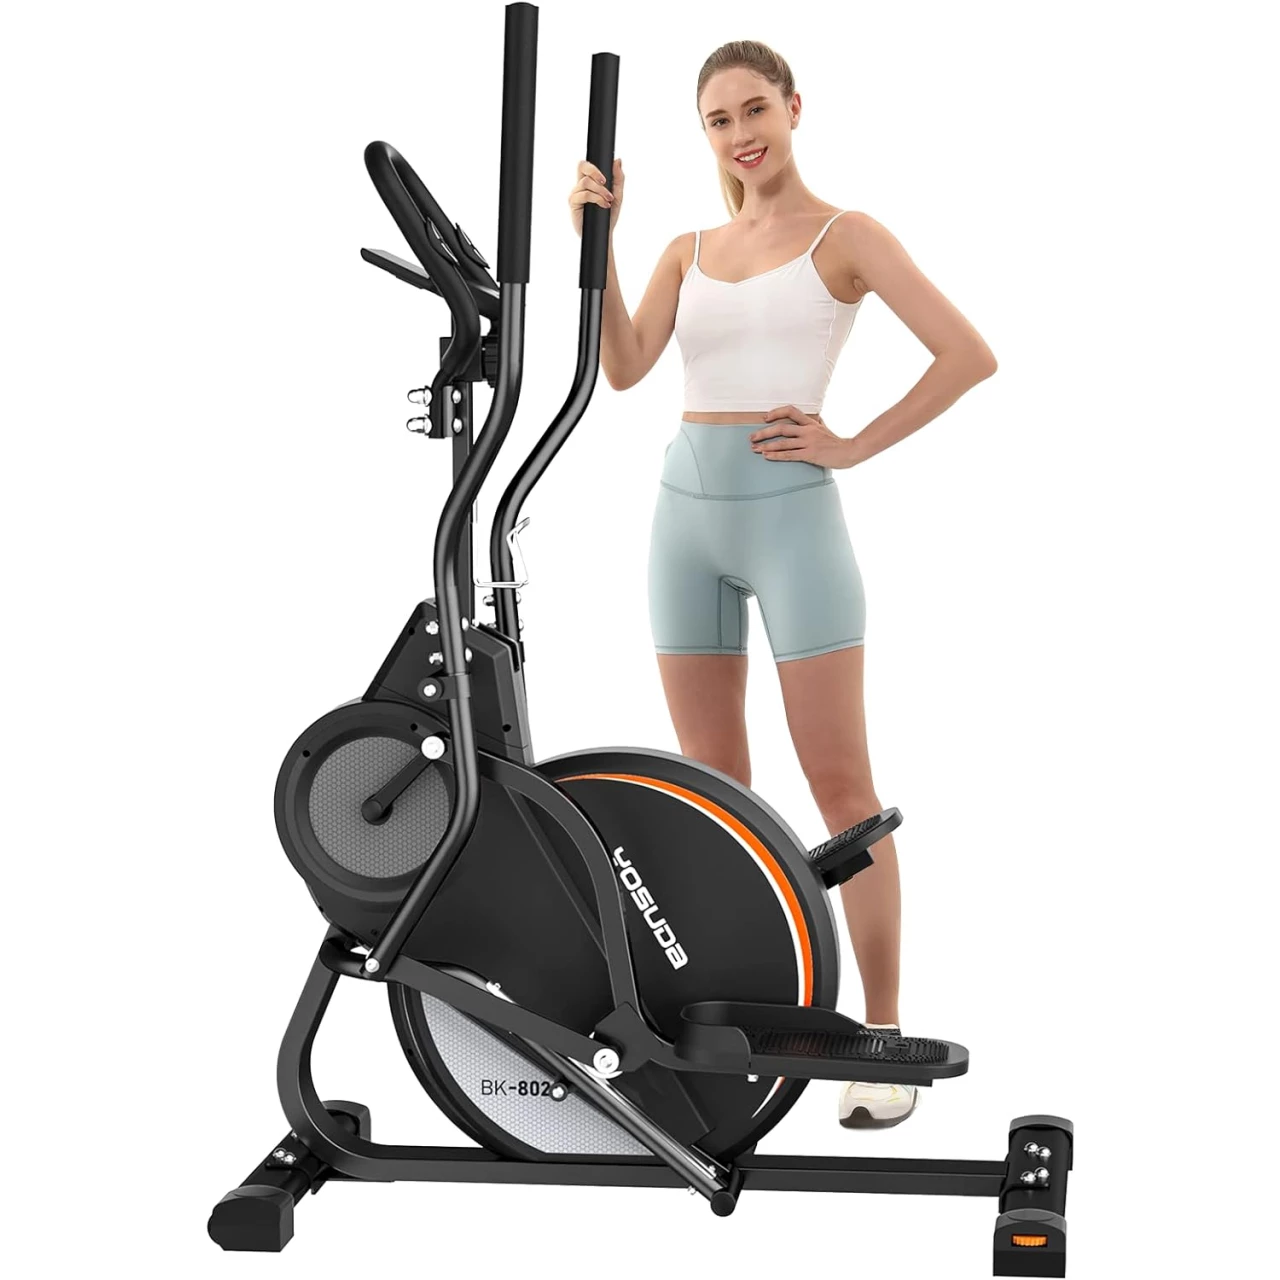 YOSUDA Pro Cardio Climber Stepping Elliptical Machine, 3 in 1 Elliptical, Total Body Fitness Cross Trainer with Hyper-Quiet Magnetic Drive System, 16 Resistance Levels, LCD Monitor &amp; iPad Mount